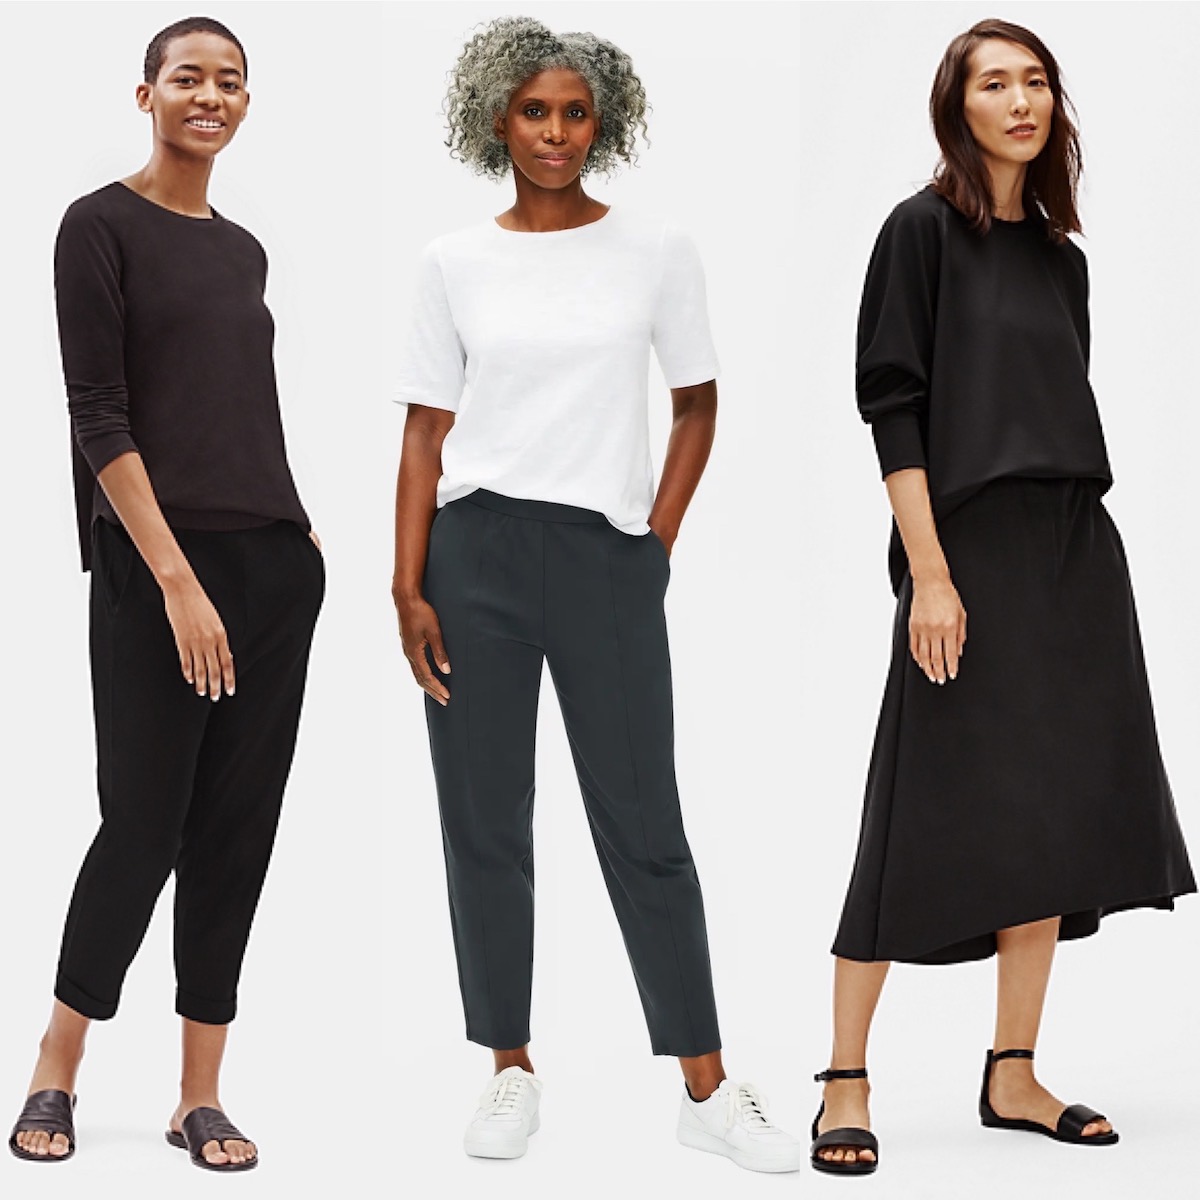 Three models wearing Eileen Fisher clothing in black, gray, and white.